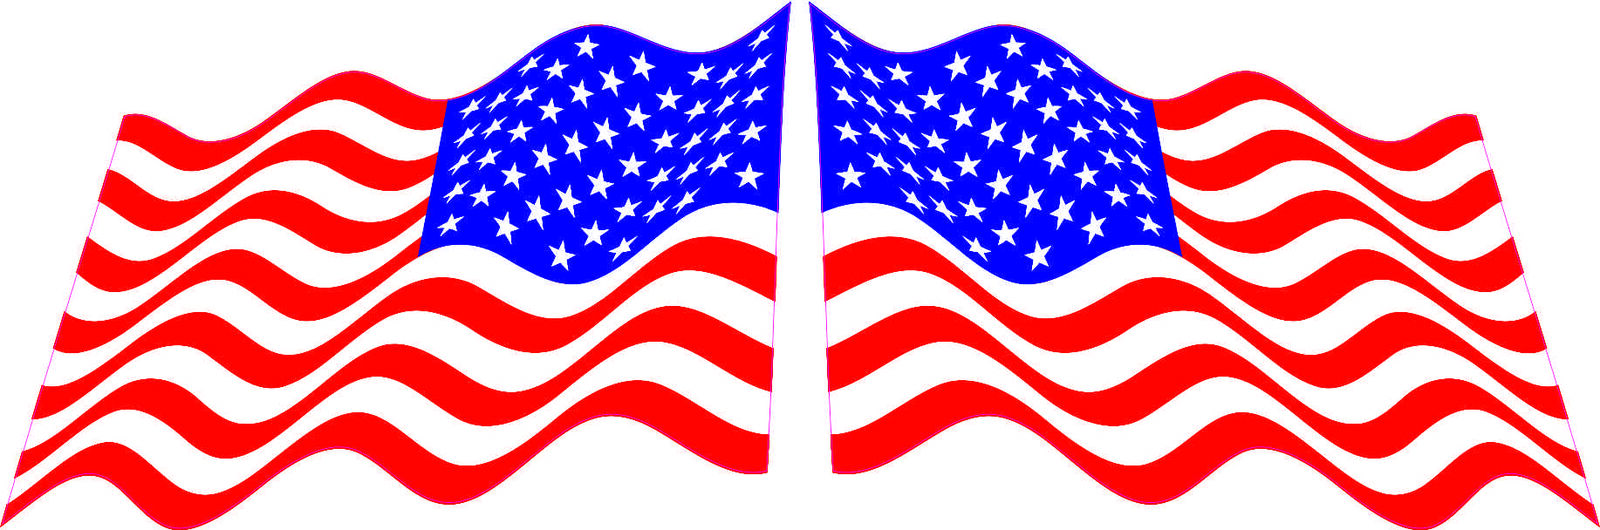 3in x 2in Mirrored Waving American Flag Stickers Car Truck Vehicle Bumper Decal